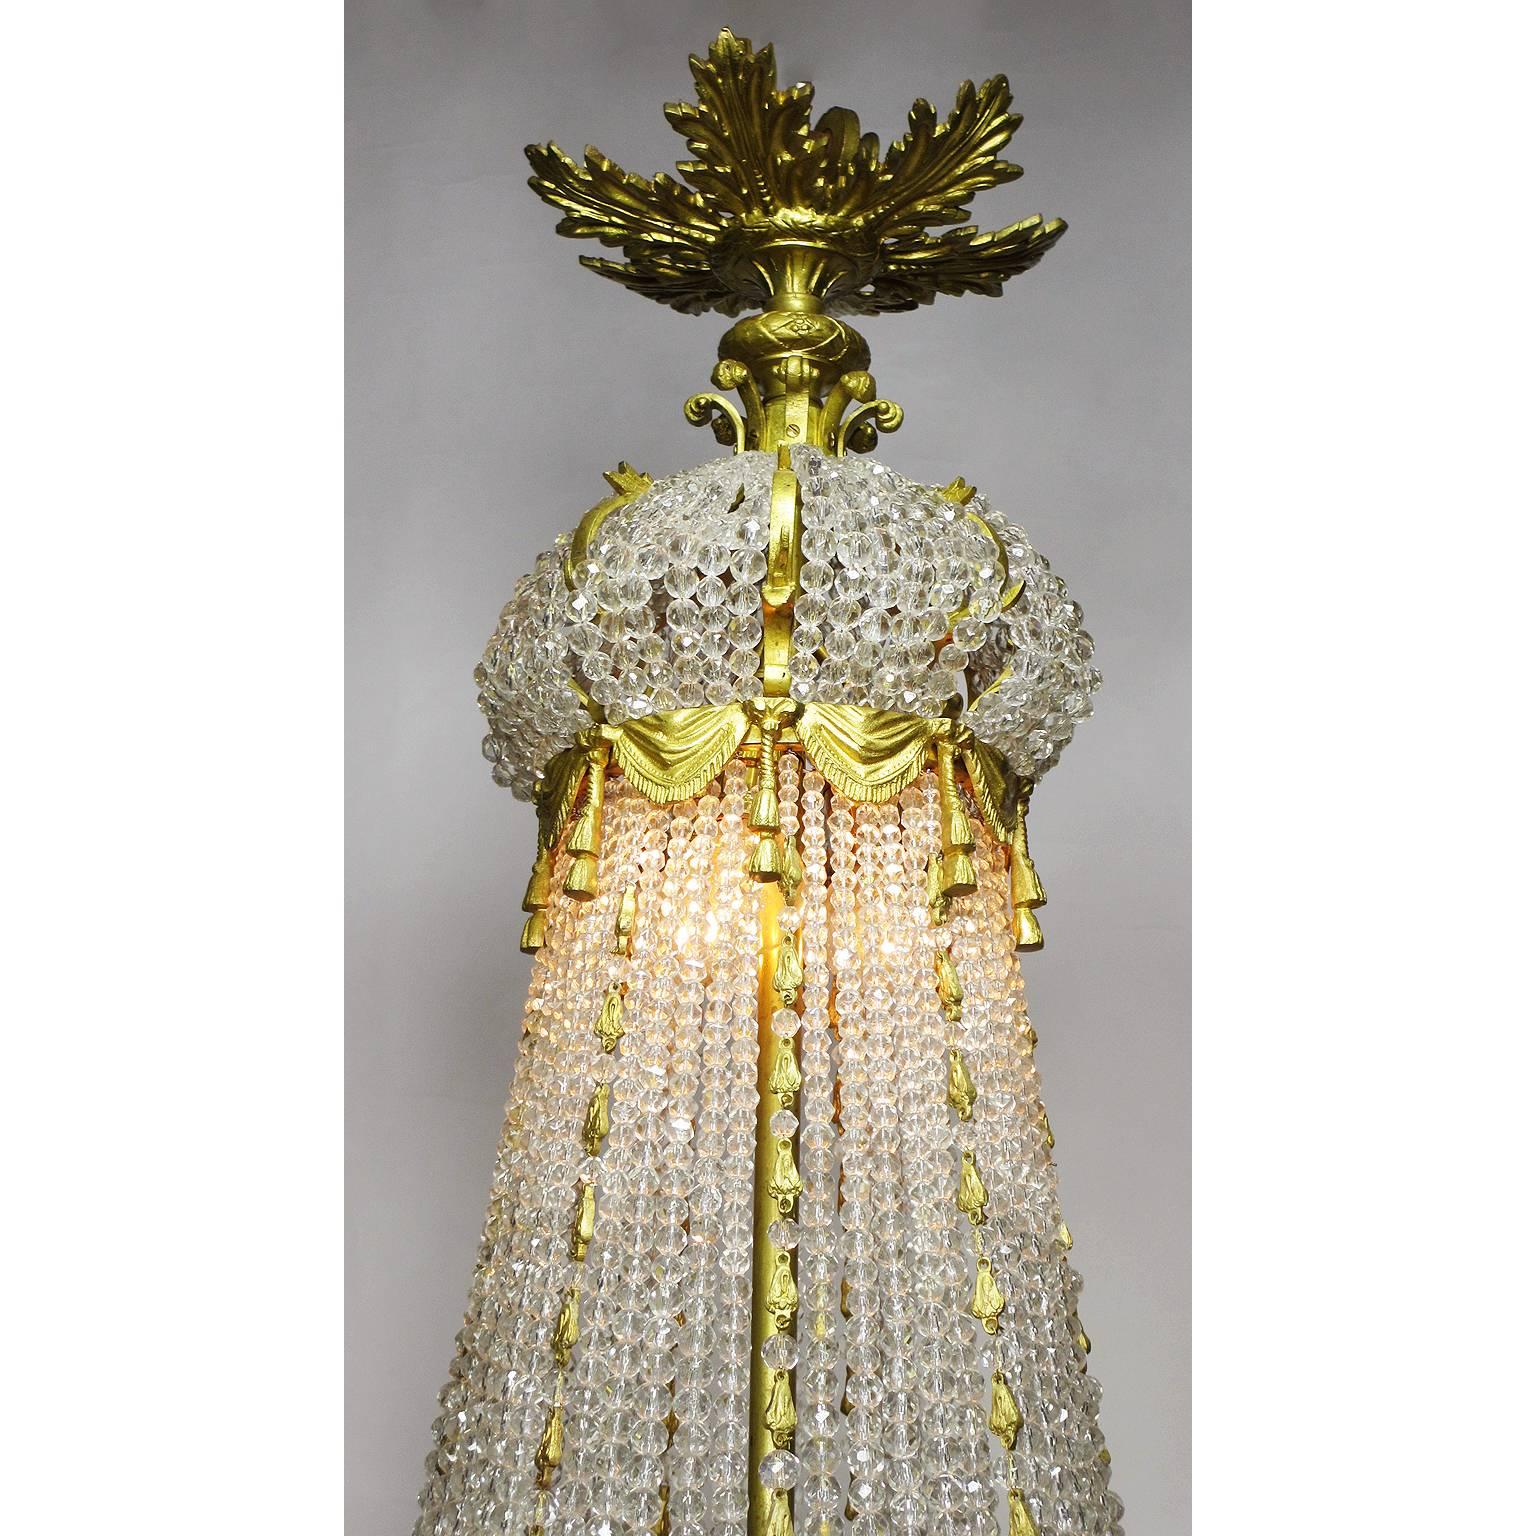 Early 20th Century Fine French Empire Style 19th-20th Century Gilt Bronze and Cut-Glass Chandelier